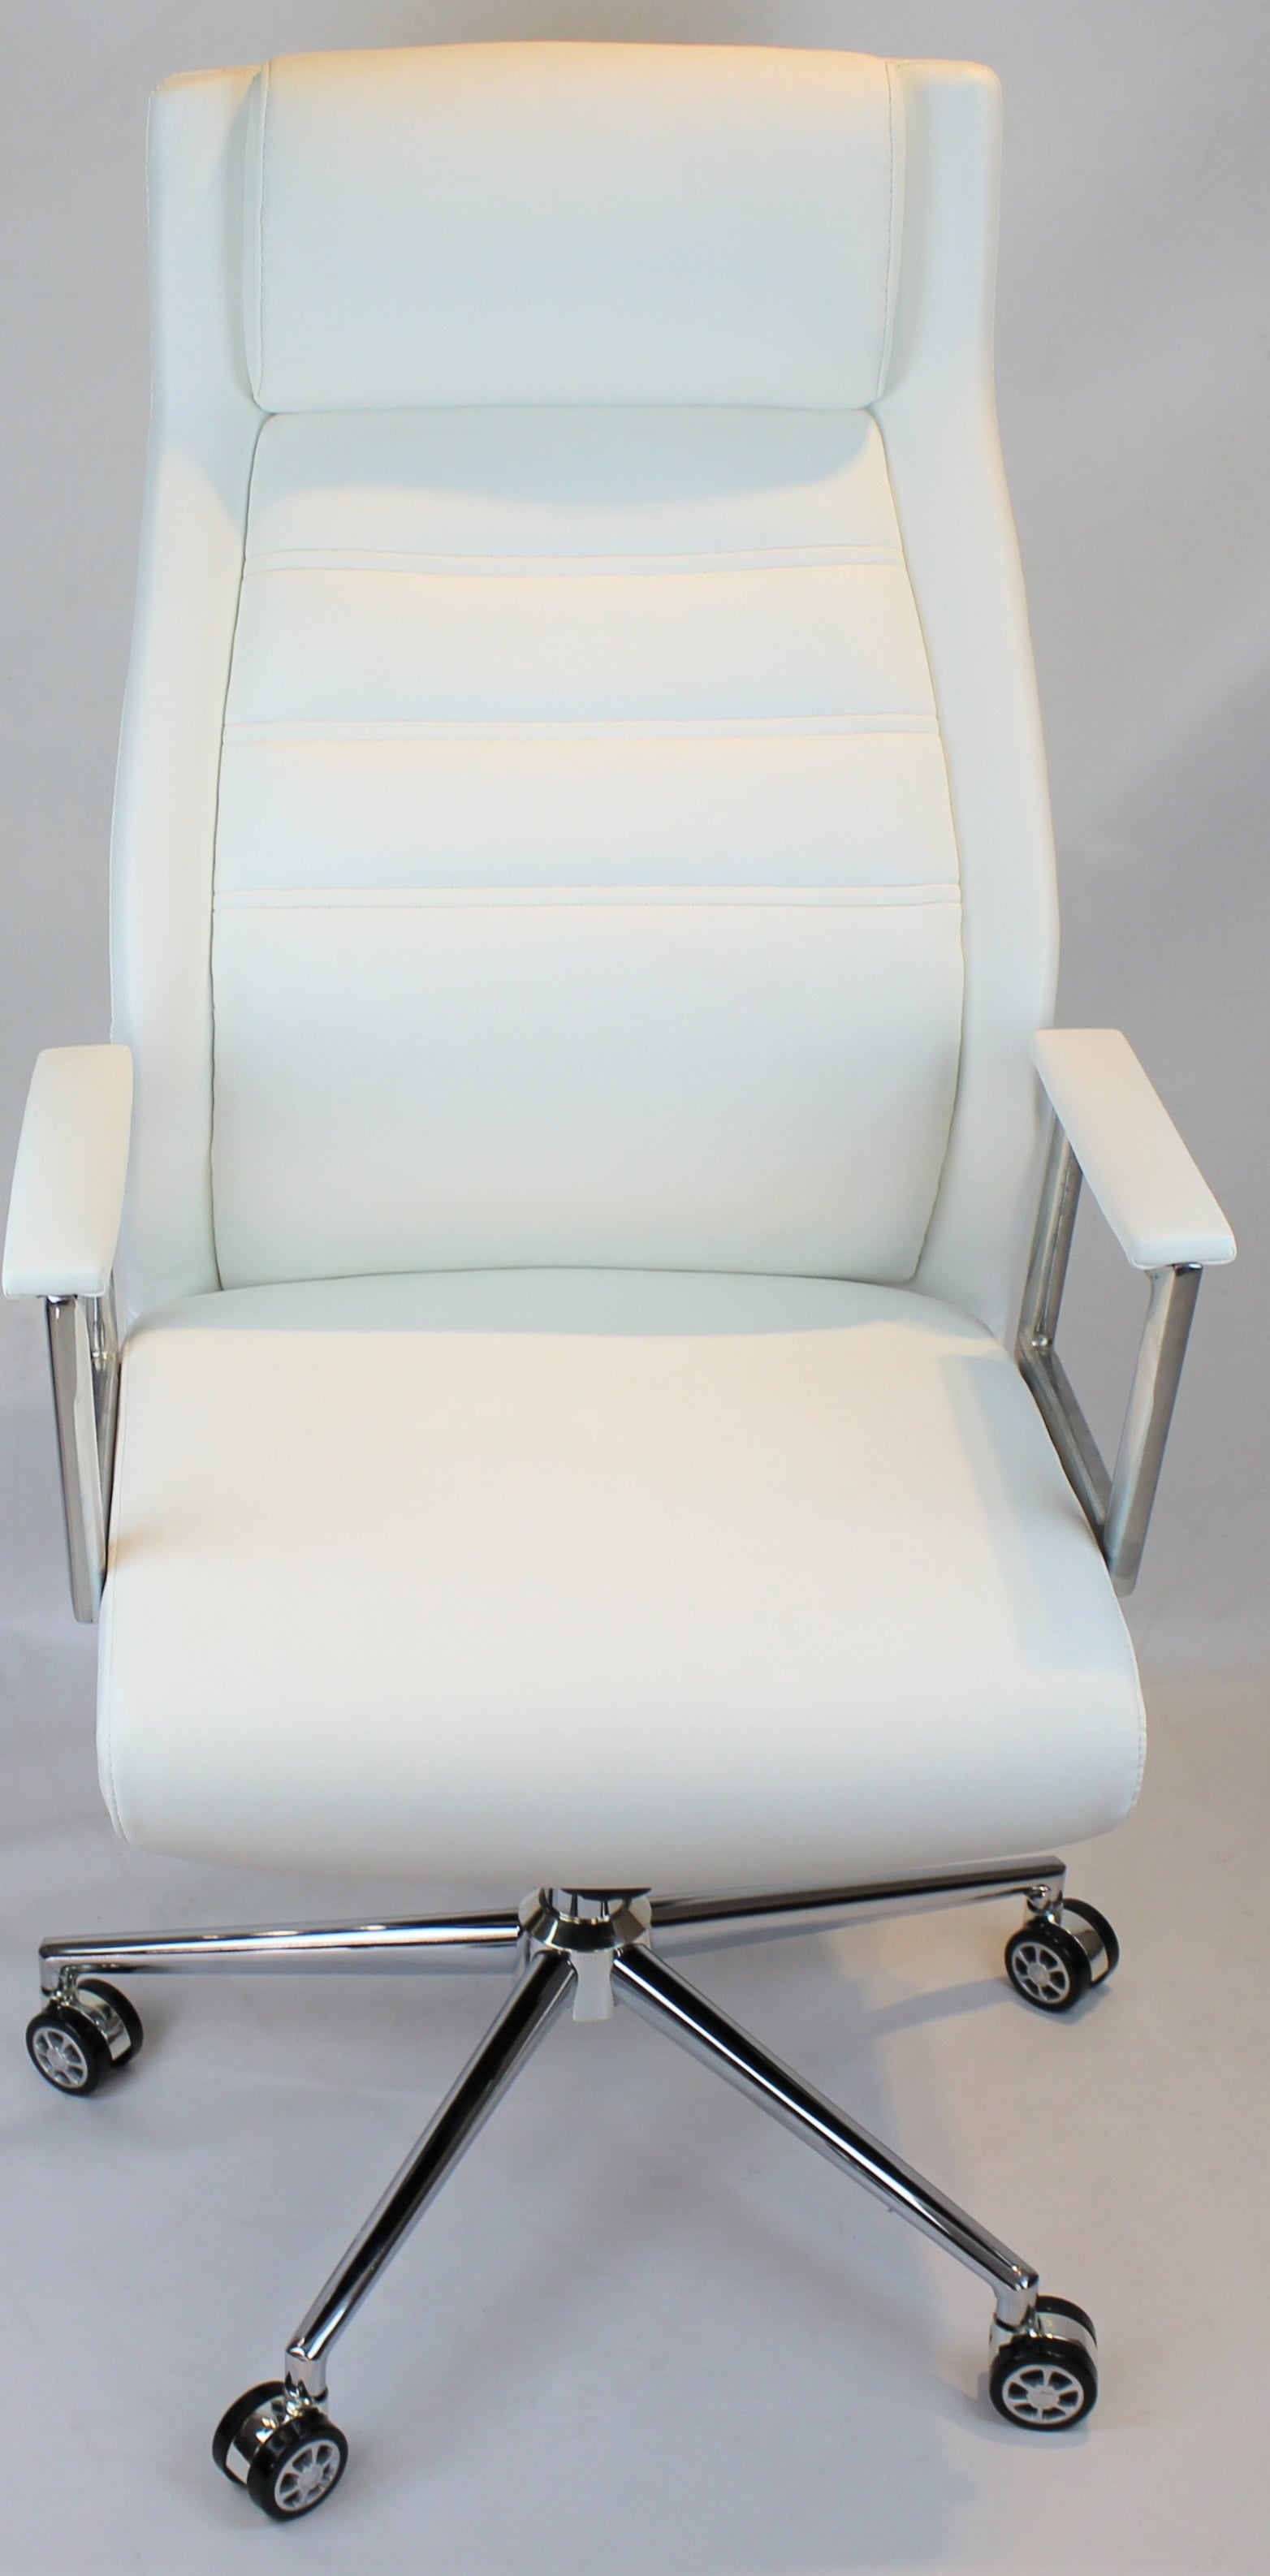 Modern White Leather Executive Office Chair - DH-103